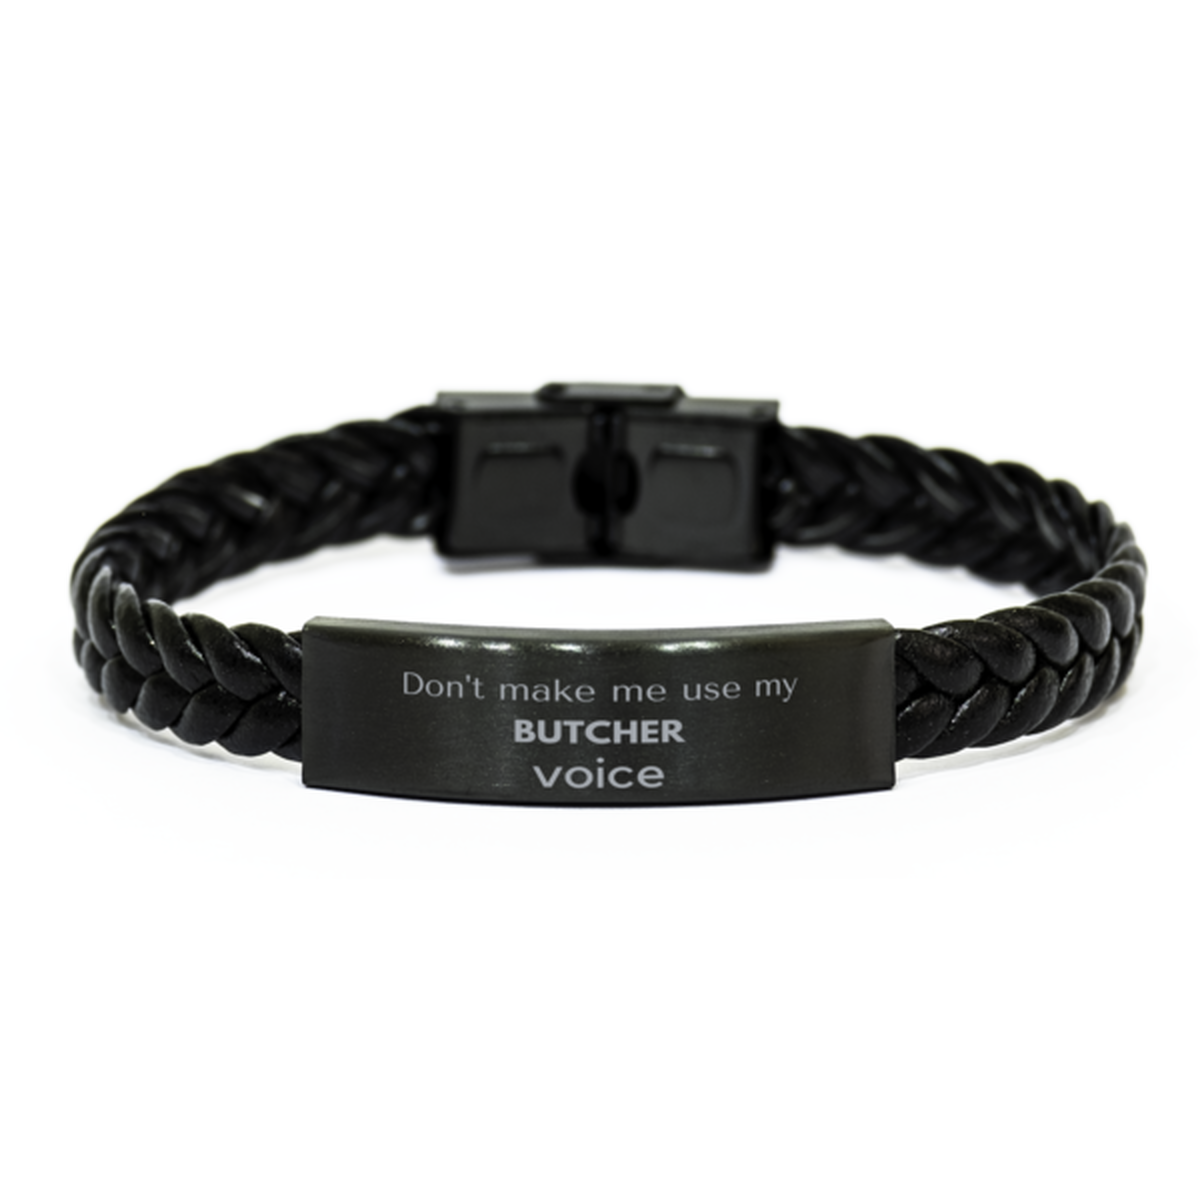 Don't make me use my Butcher voice, Sarcasm Butcher Gifts, Christmas Butcher Braided Leather Bracelet Birthday Unique Gifts For Butcher Coworkers, Men, Women, Colleague, Friends